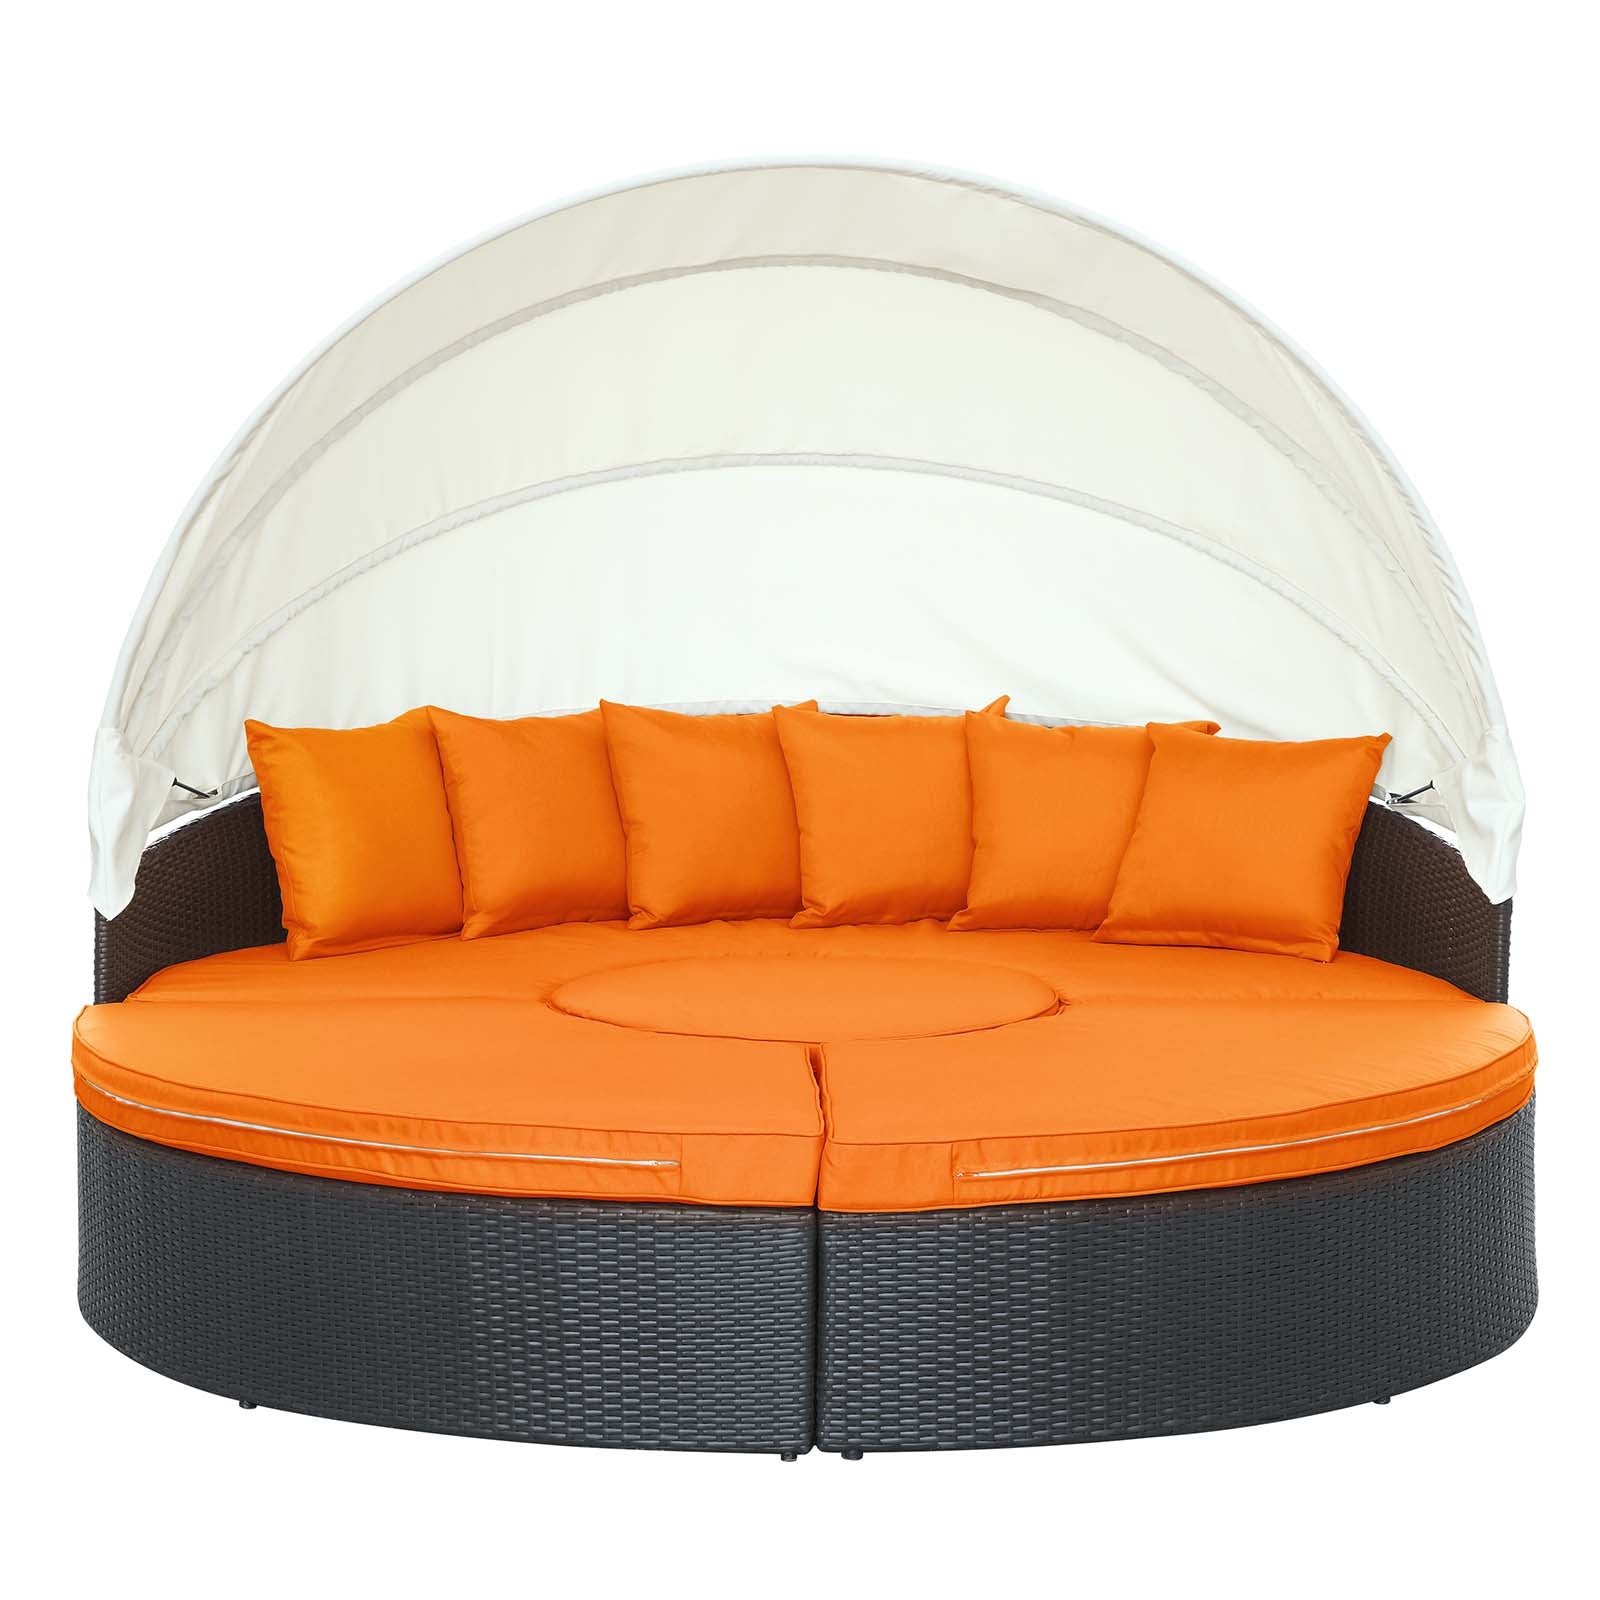 Modway Patio Daybeds - Quest Canopy Outdoor Patio Daybed Espresso Orange